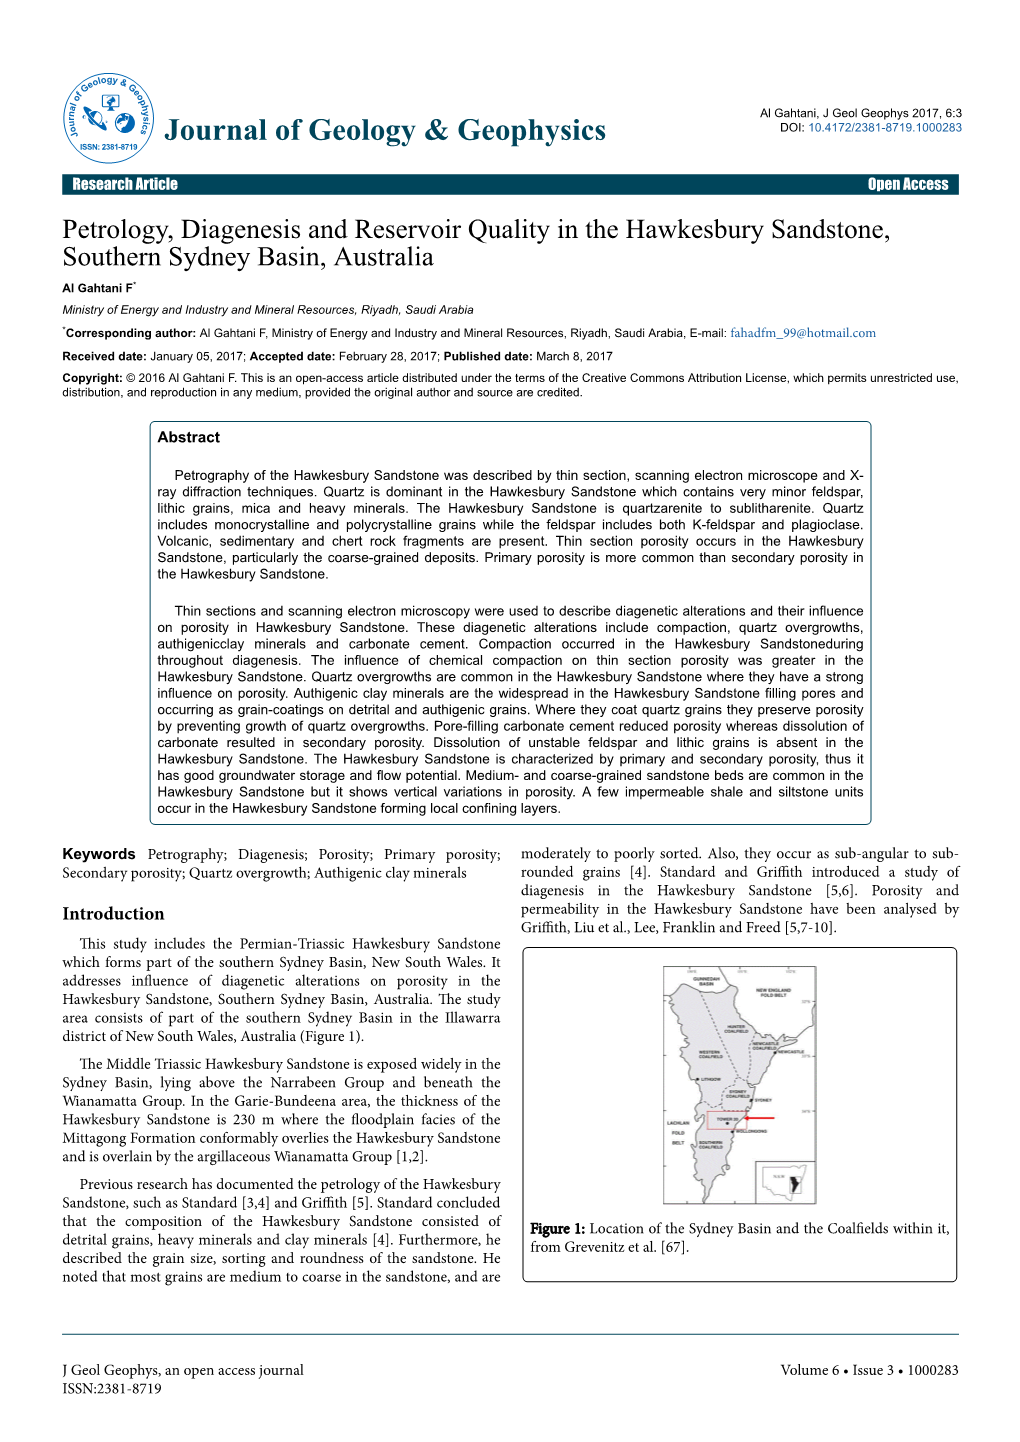 Petrology, Diagenesis and Reservoir Quality in the Hawkesbury